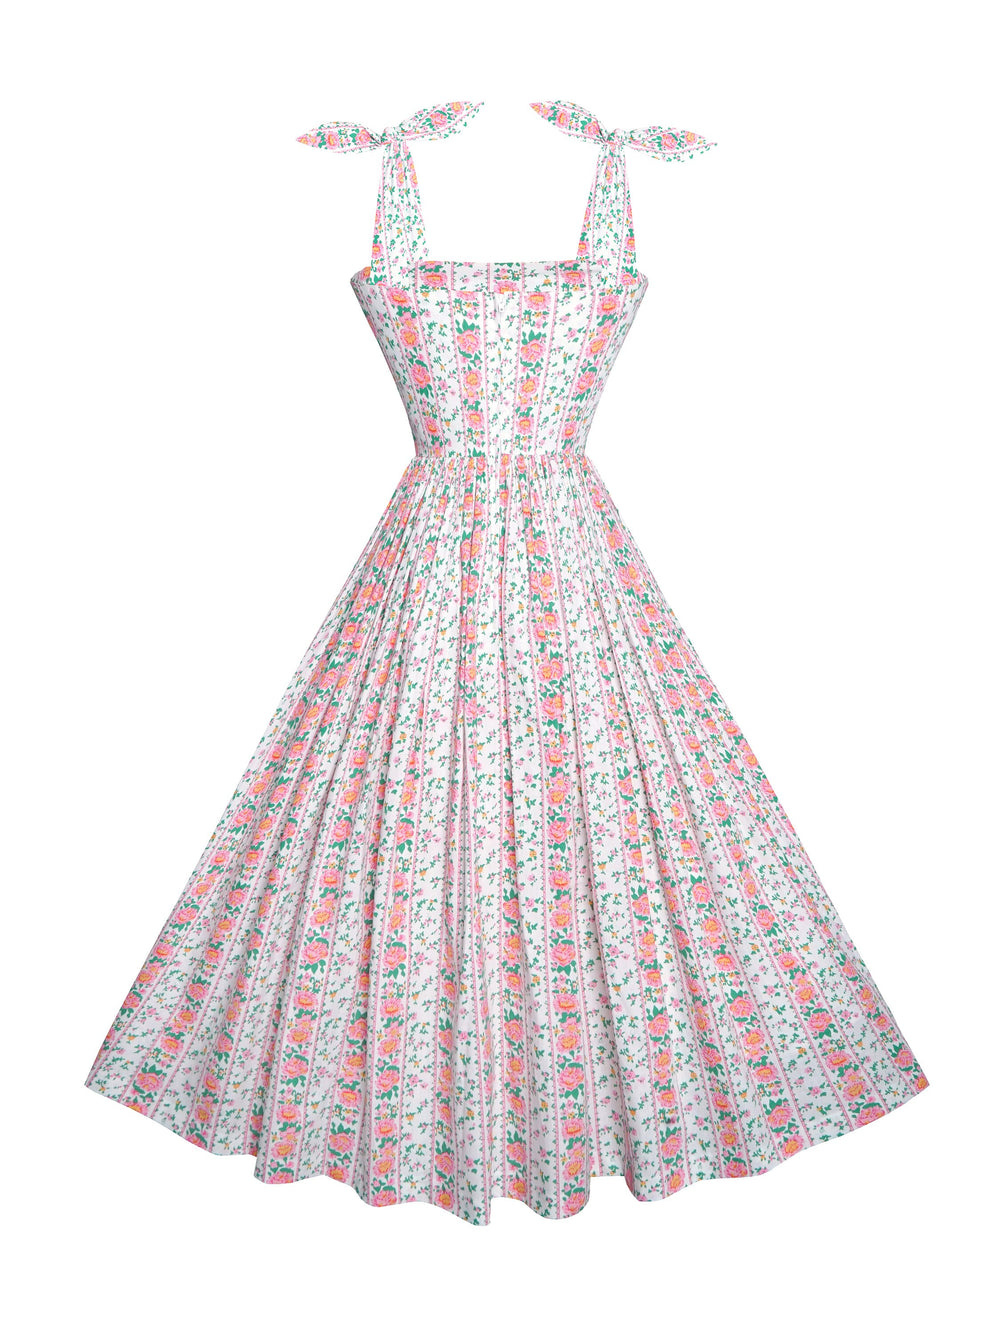 MTO - Gilda Dress Pink "Country Cottage Floral"